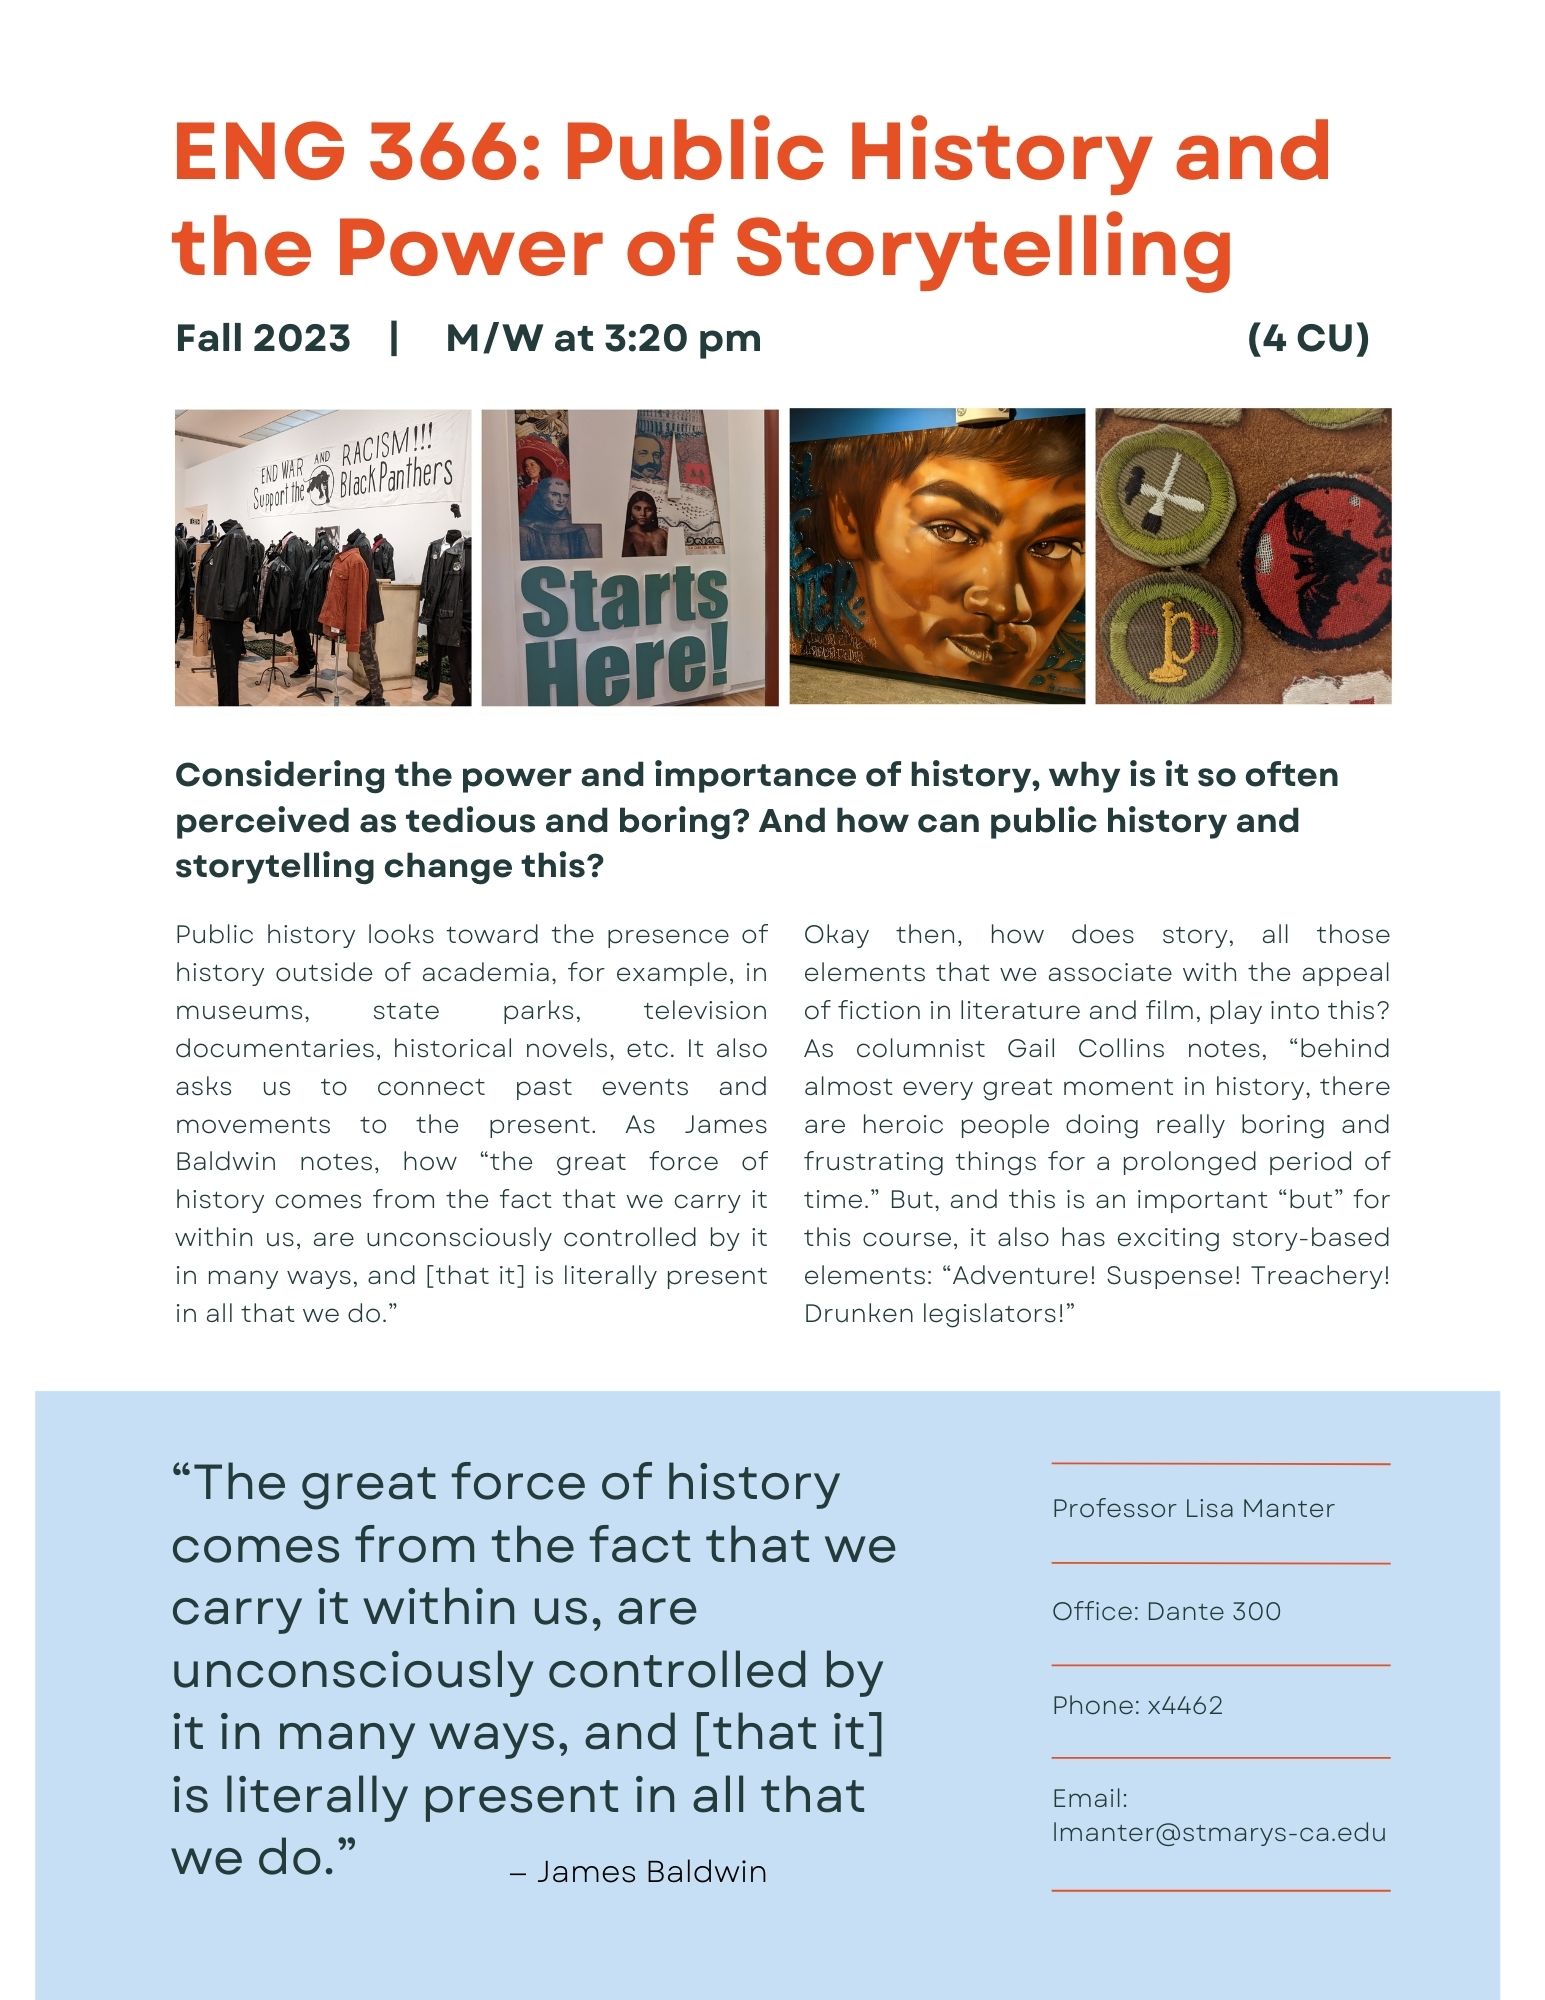 english 366 public history and the power of storytelling flyer